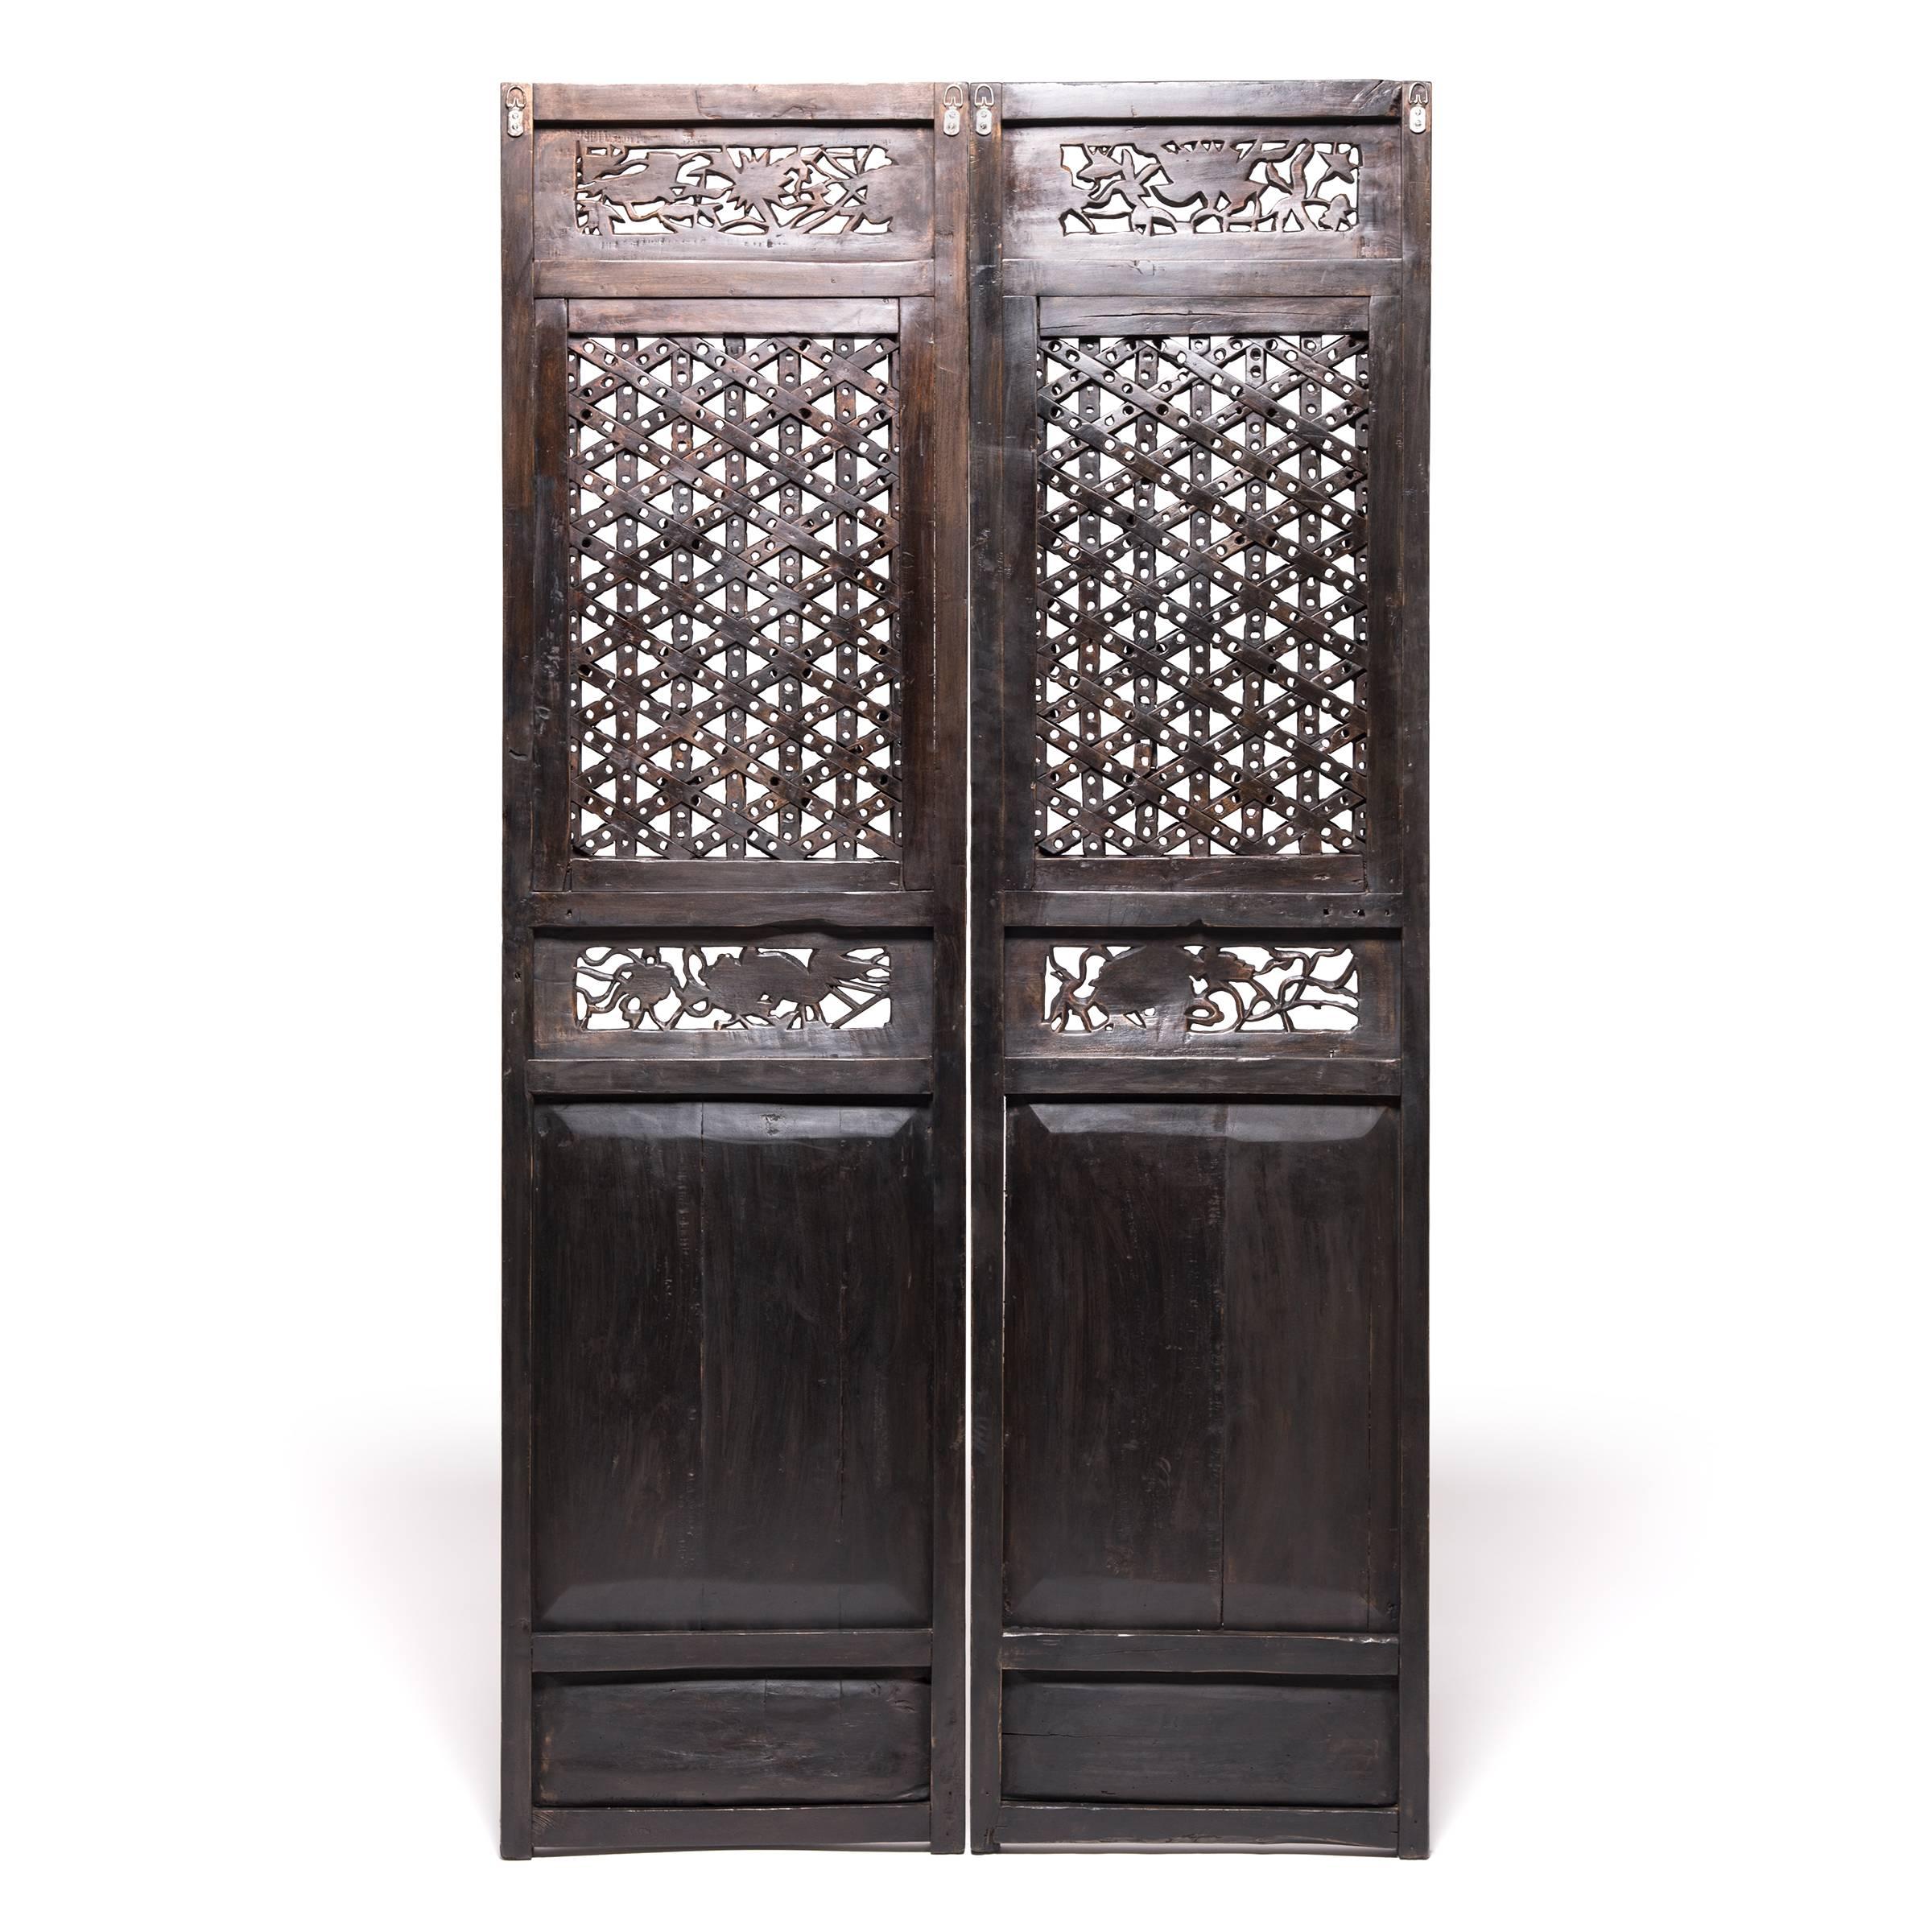 This pair of elaborately carved early 19th century Chinese courtyard panels feature intricately carved lattice comprised of chain links connected with floral blossoms. This complicated lattice pattern was brilliantly created by interlocking carved